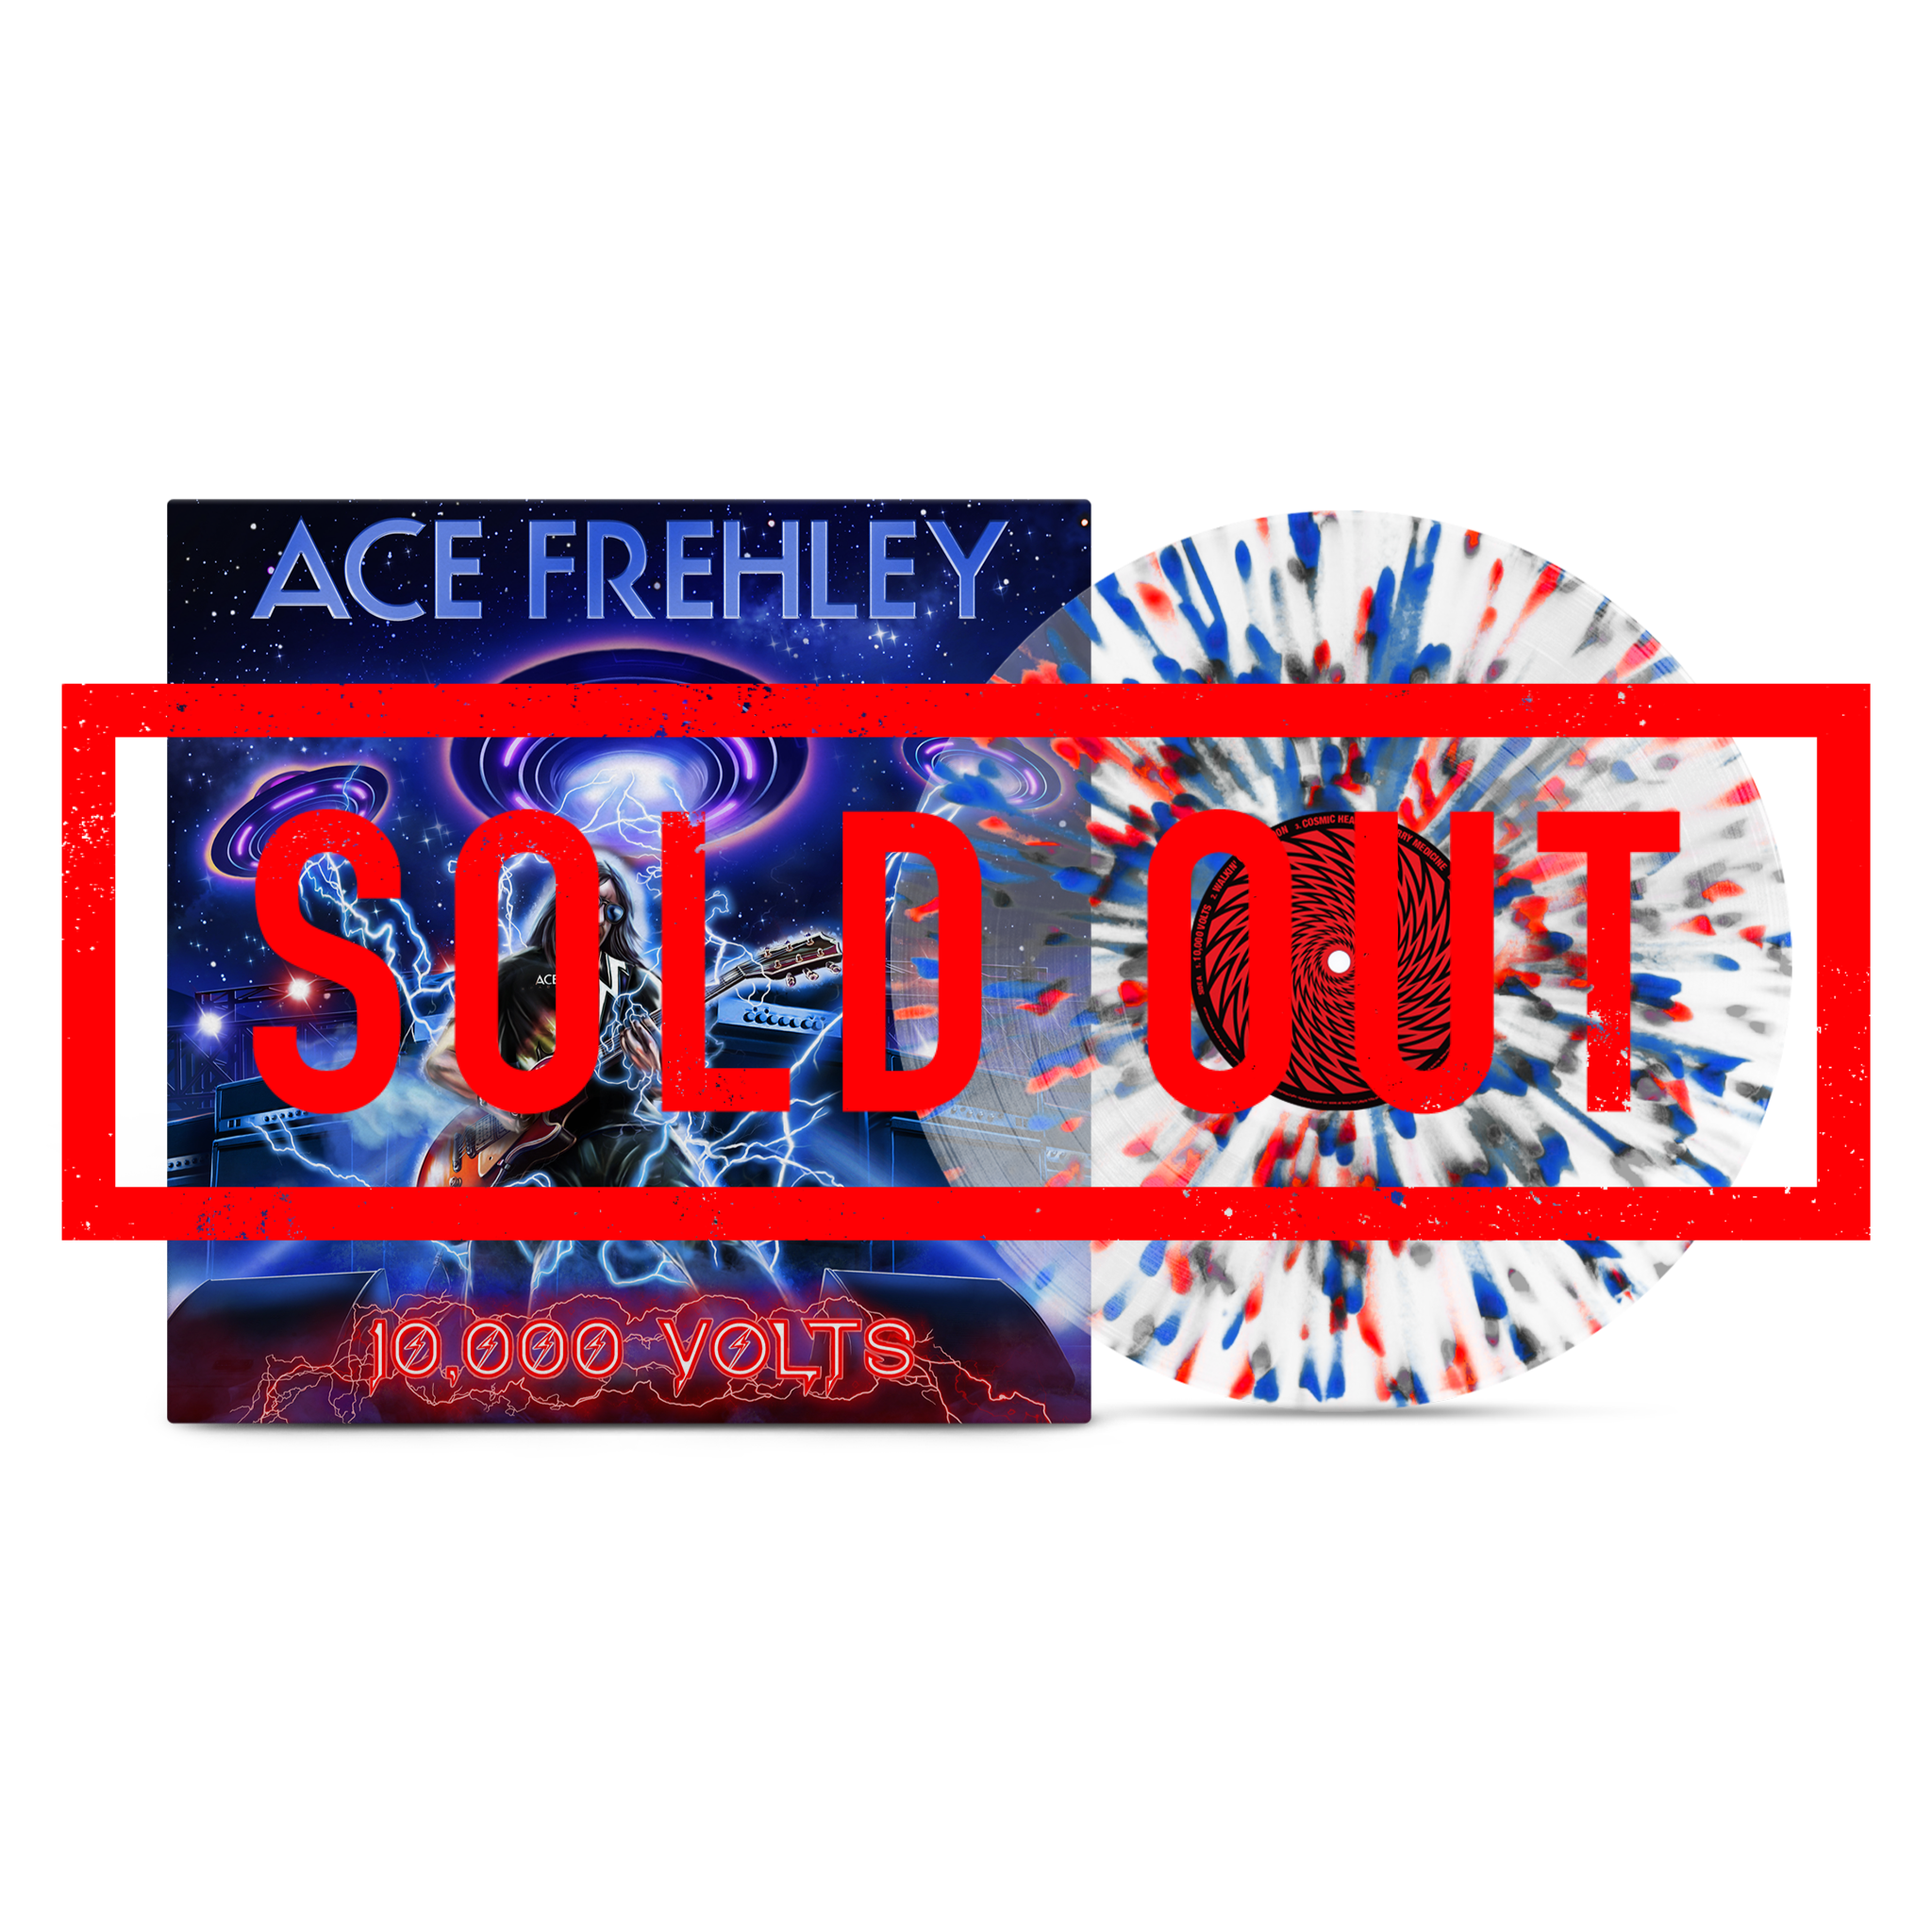 Ace Frehley - 10,000 Volts Tri Color Splatter Vinyl (Sam Ash In-Store Exclusive)